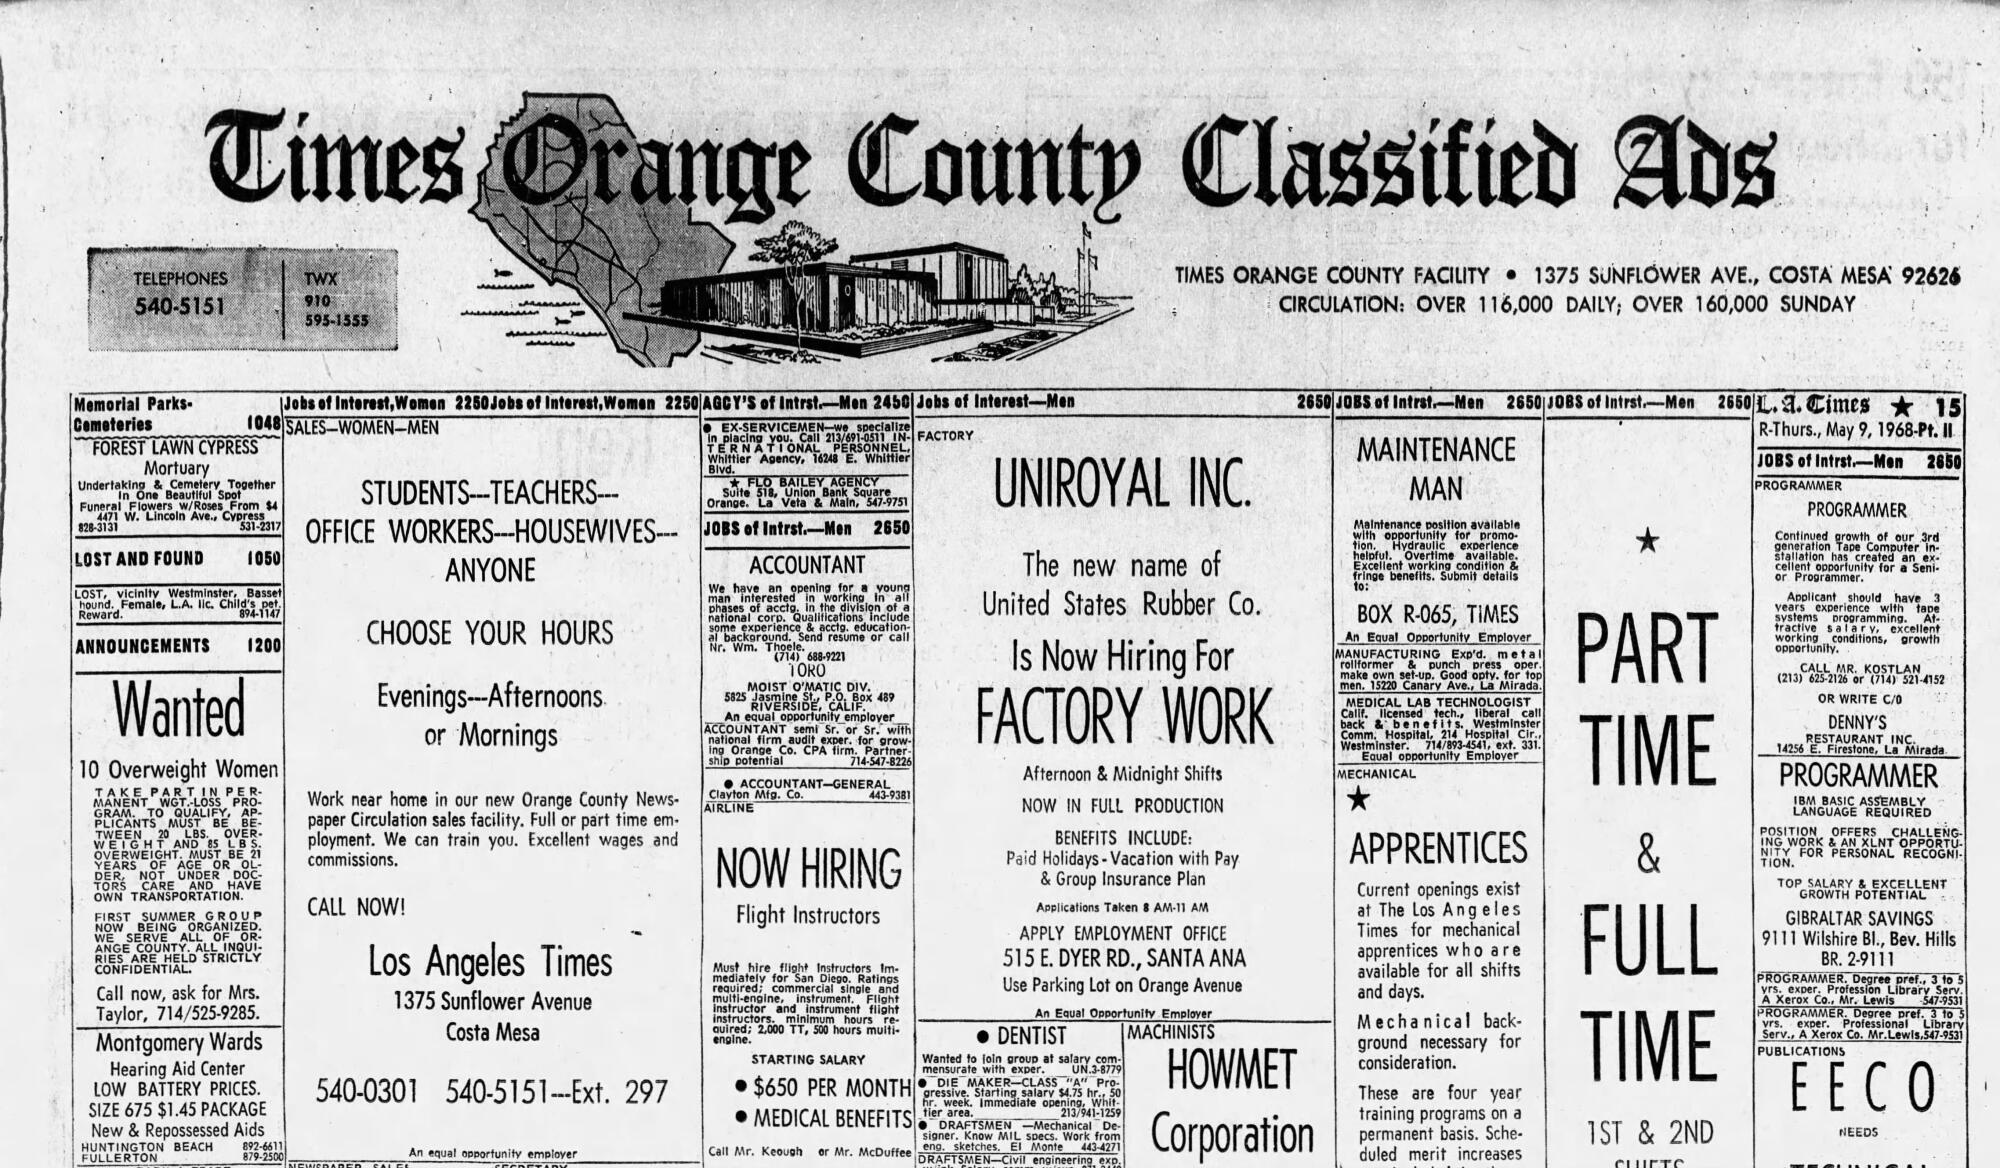 A vintage newspaper classified ads section has a masthead that reads "Times Orange County Classified Ads"